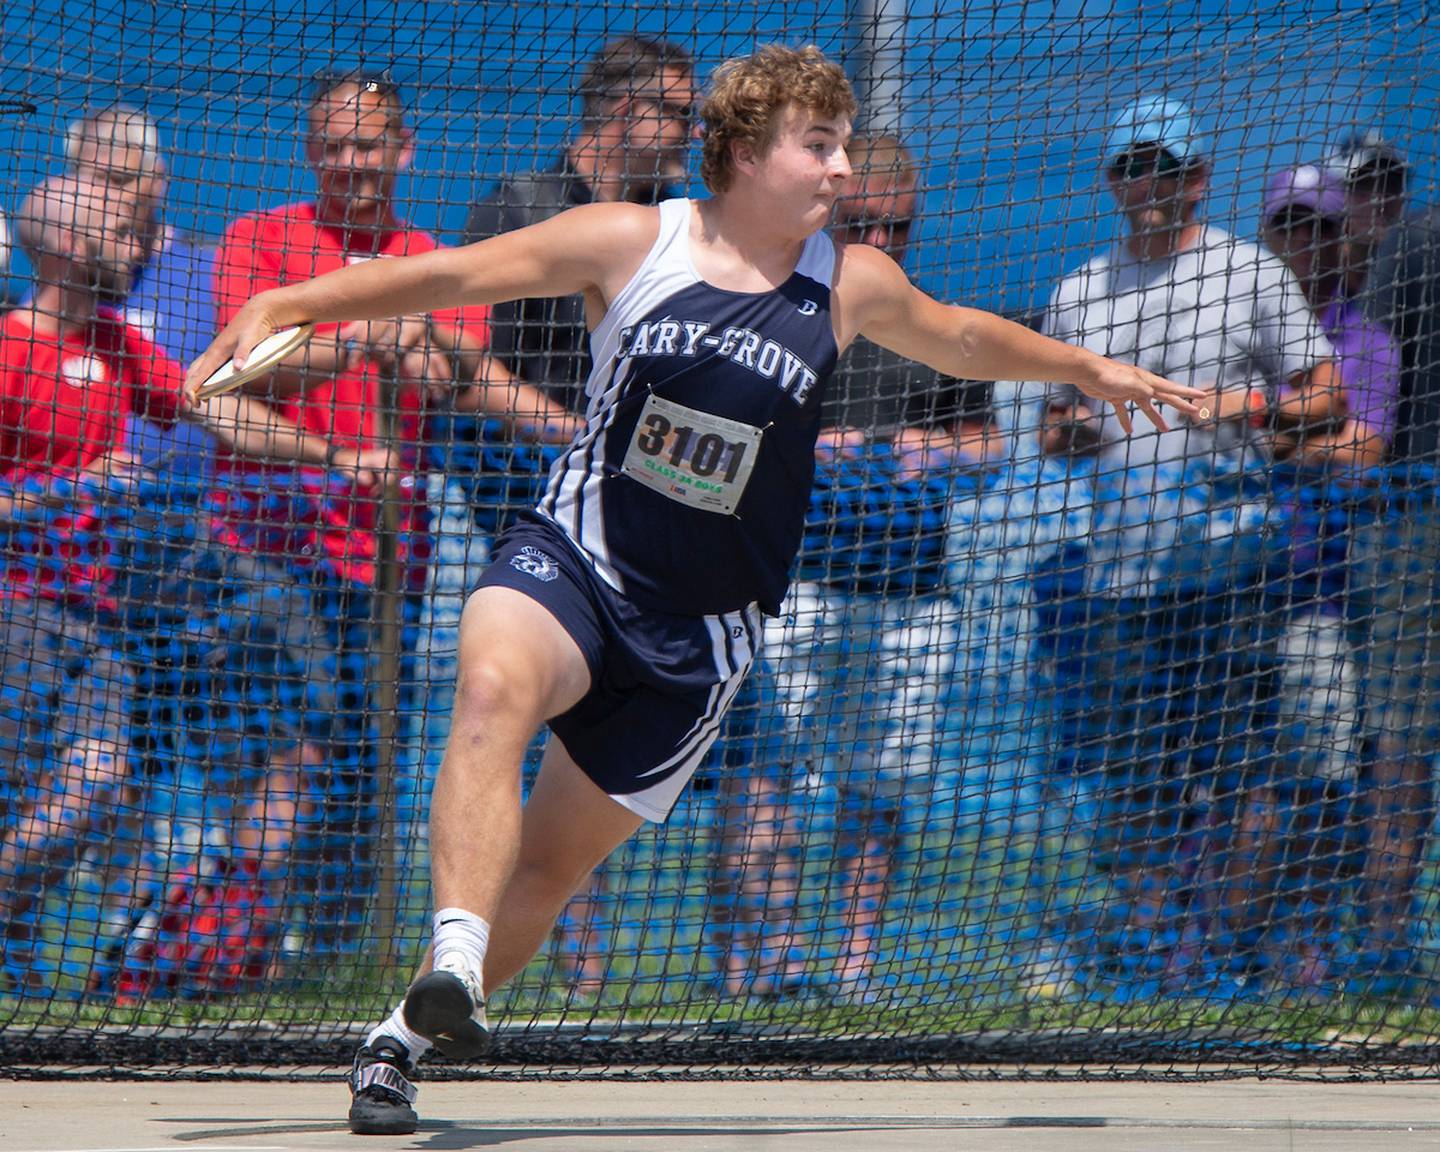 Cary-Grove's Zach Petko competes in the Class 3A discus throw on June 19, 2021 during the Class 3A Boys Track and Field State Meet in Charleston.